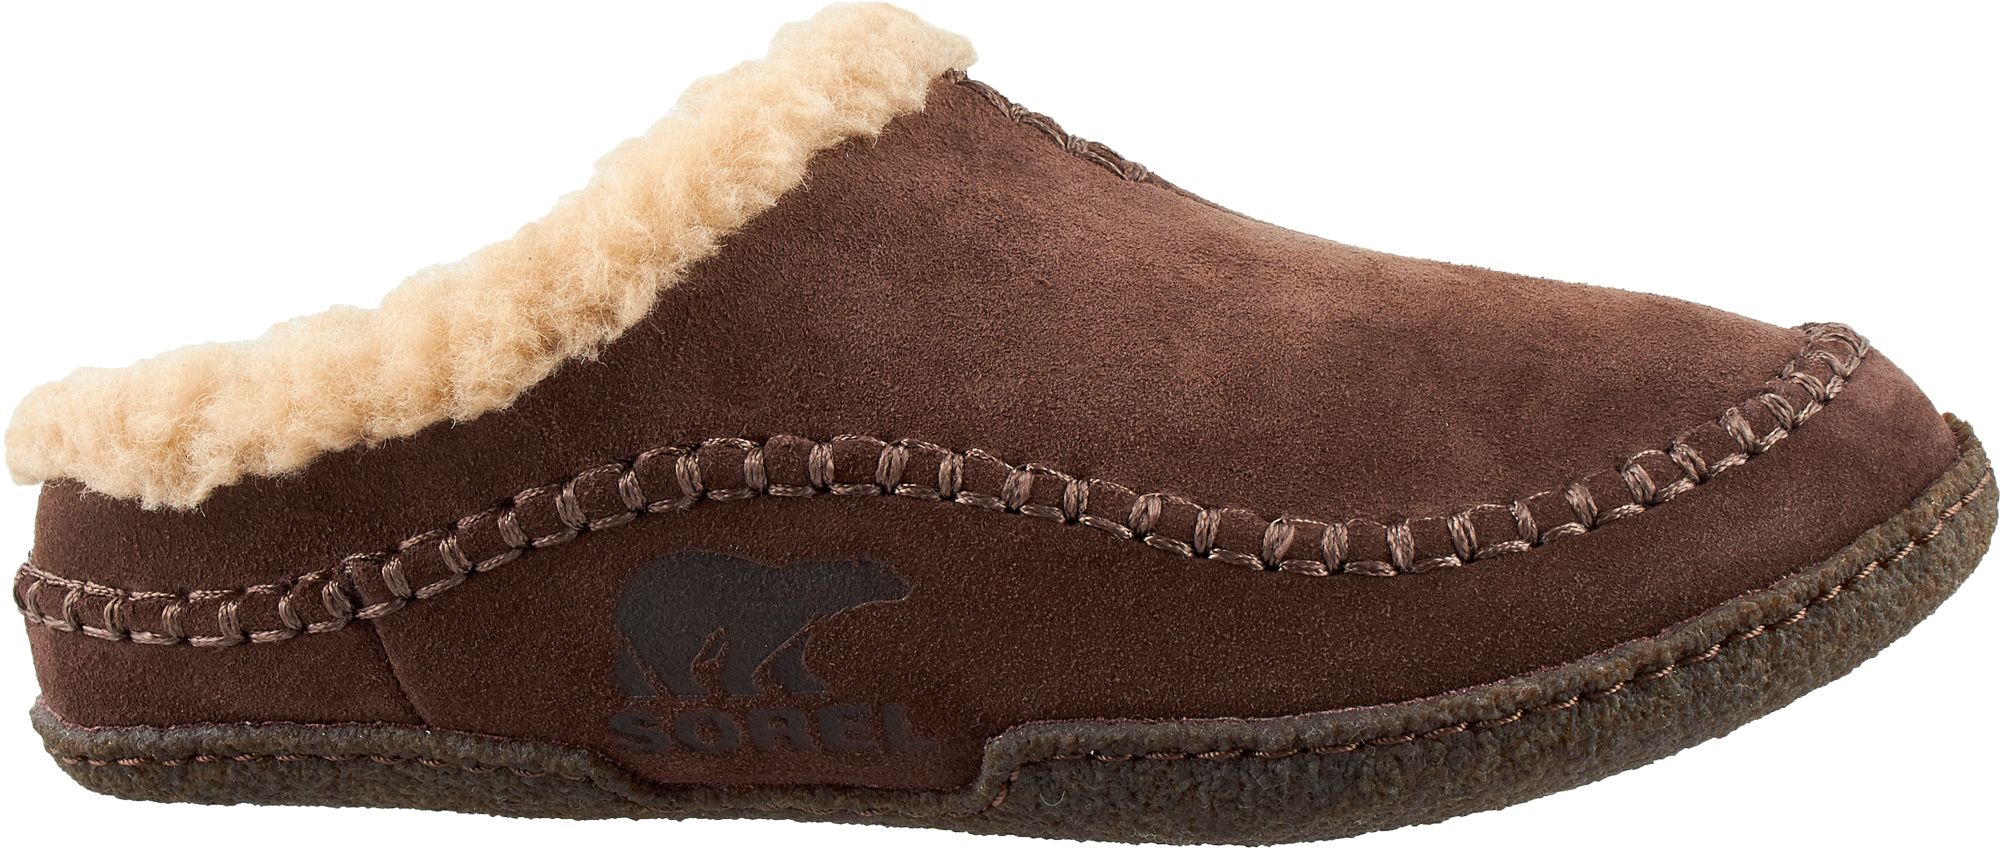 SOREL Shoes - Boots, Slippers & Sandals | Best Price Guarantee at DICK&#39;S